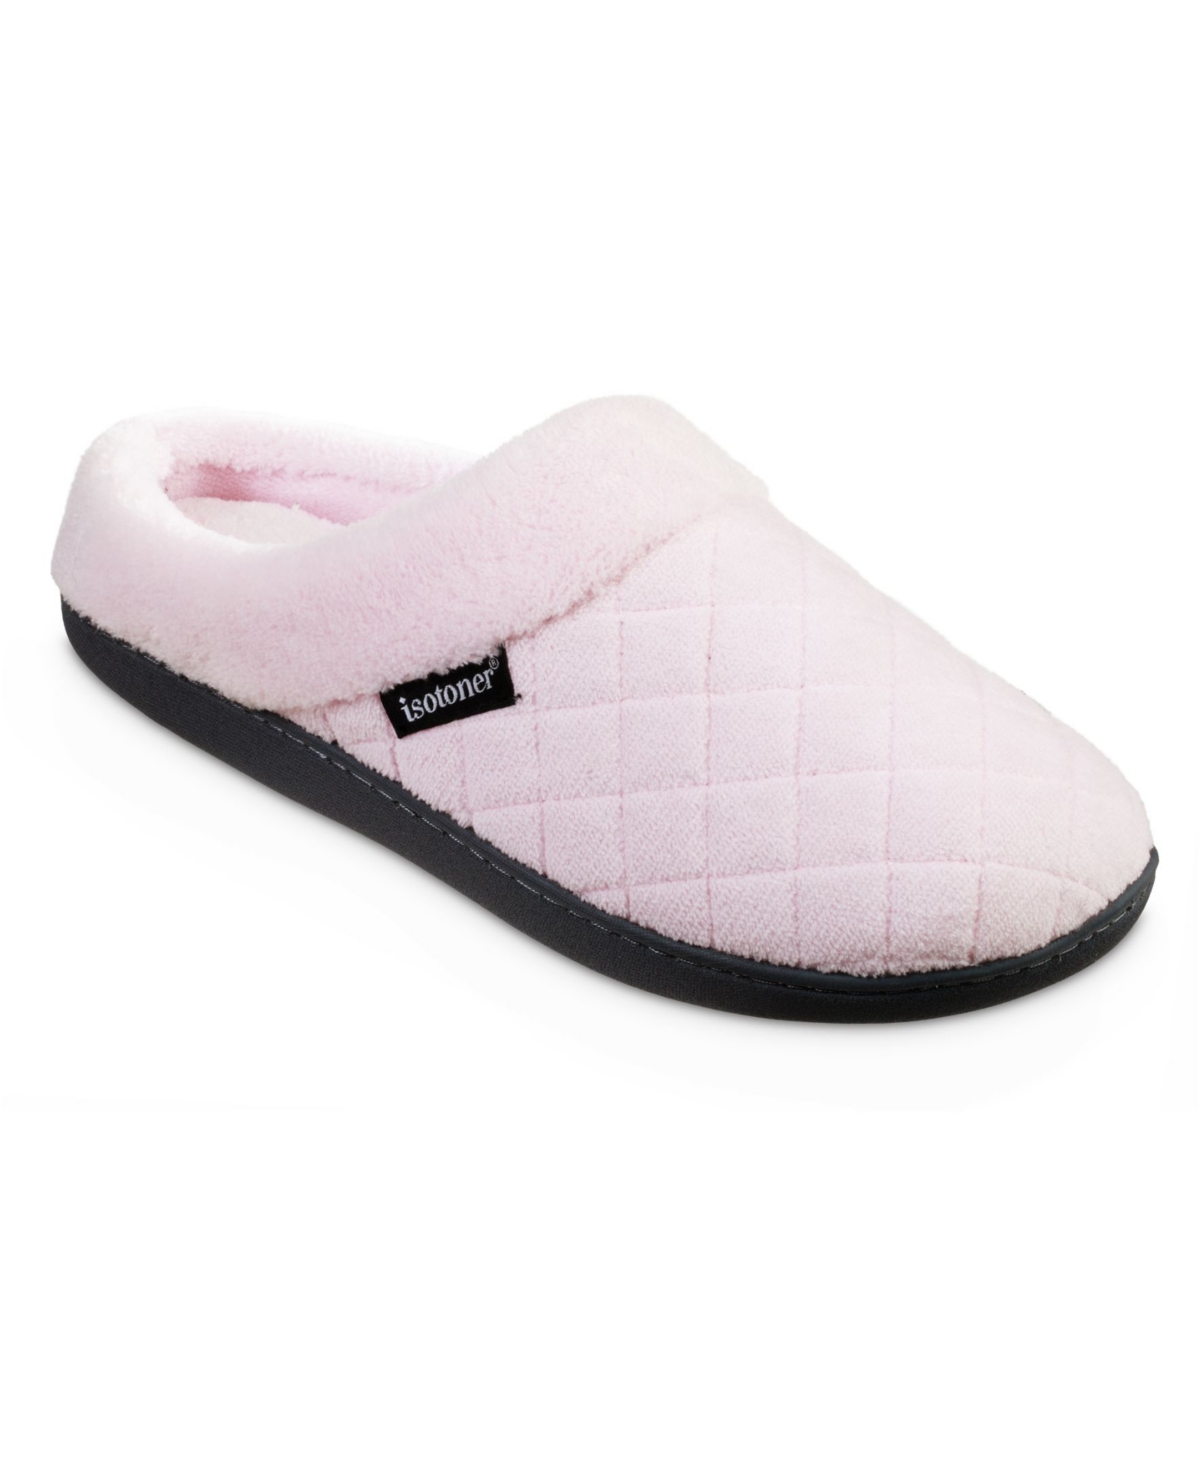 Women's Memory Foam Microterry Milly Hoodback Slippers - Peony